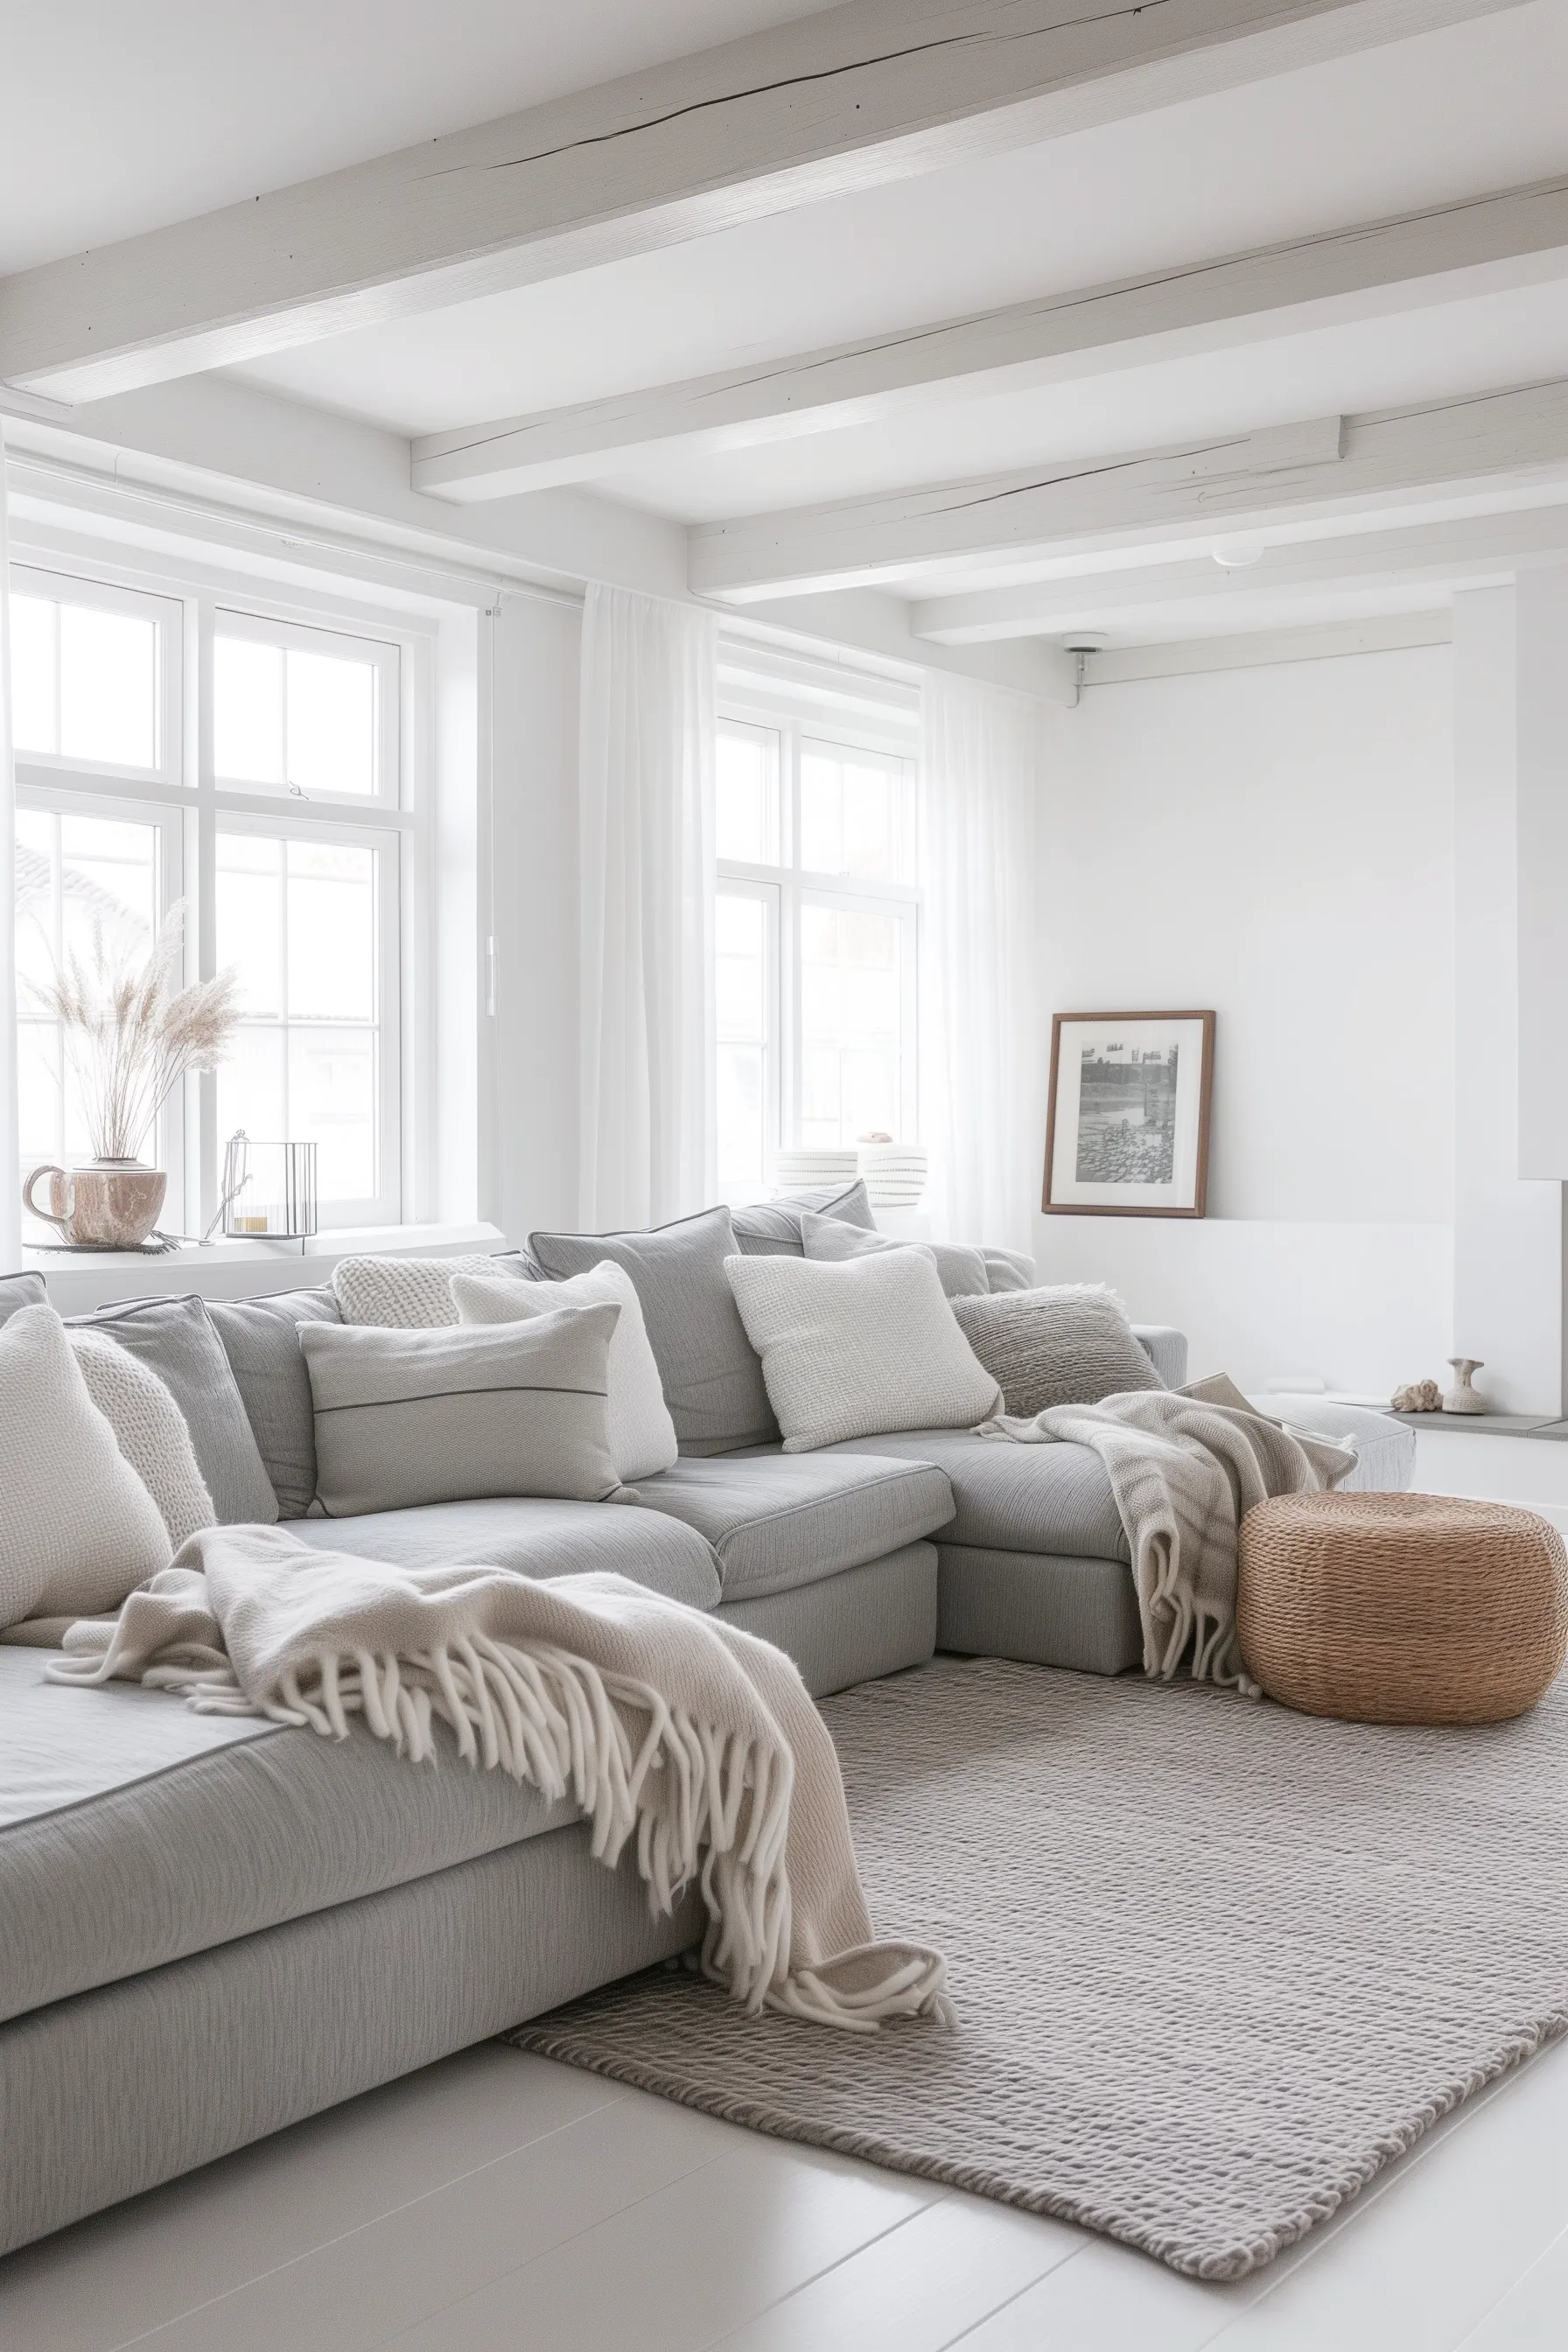 A grey sofa with white throws and pillows with rattan